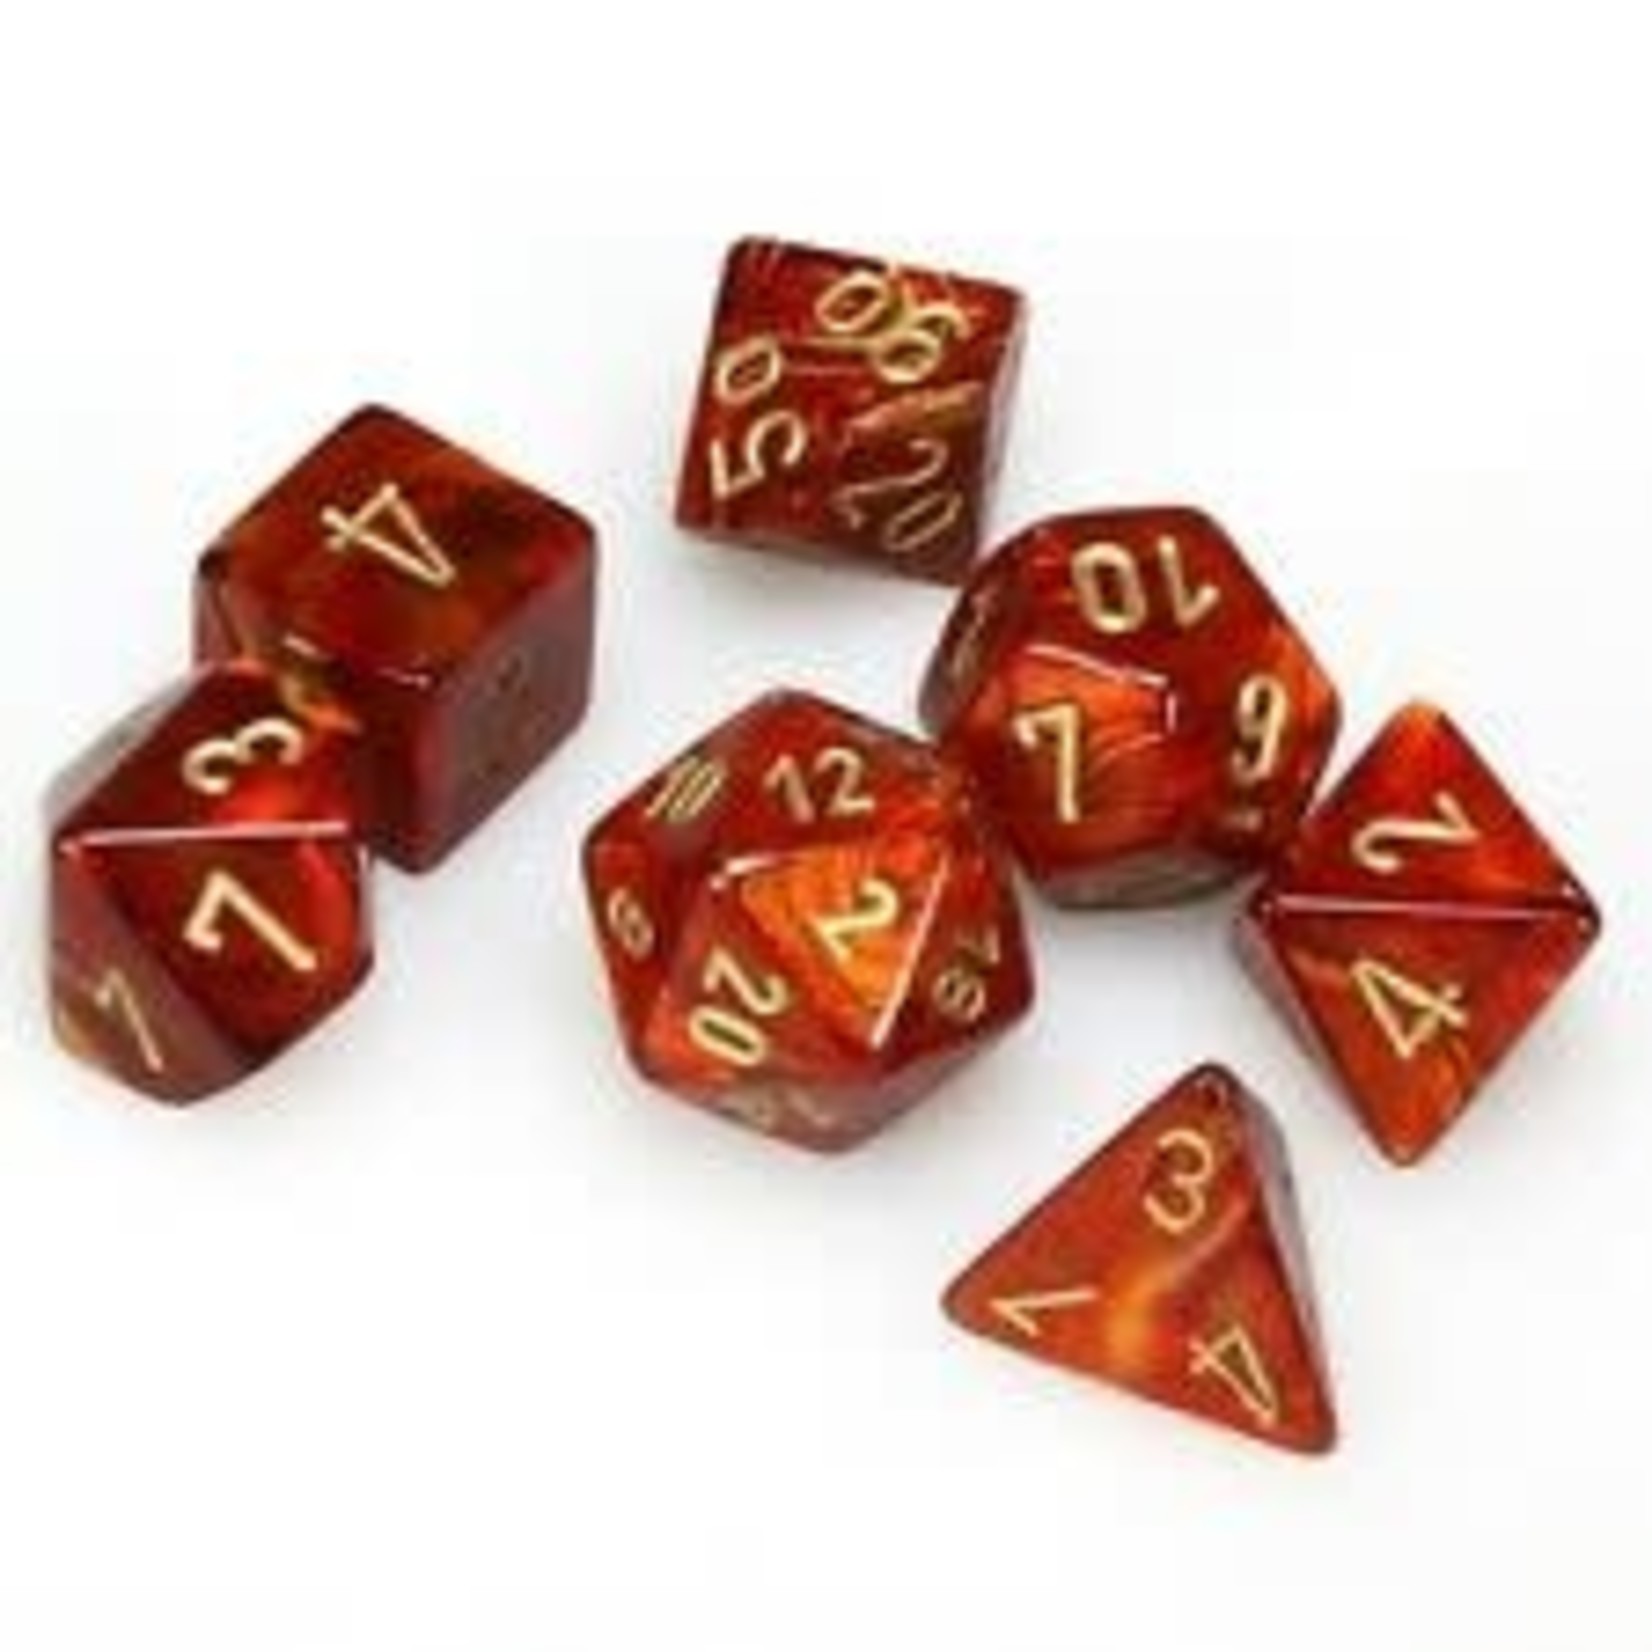 Chessex Dice: 7-Set Cube Scarab Scarlet with Gold Numbers (Chessex)